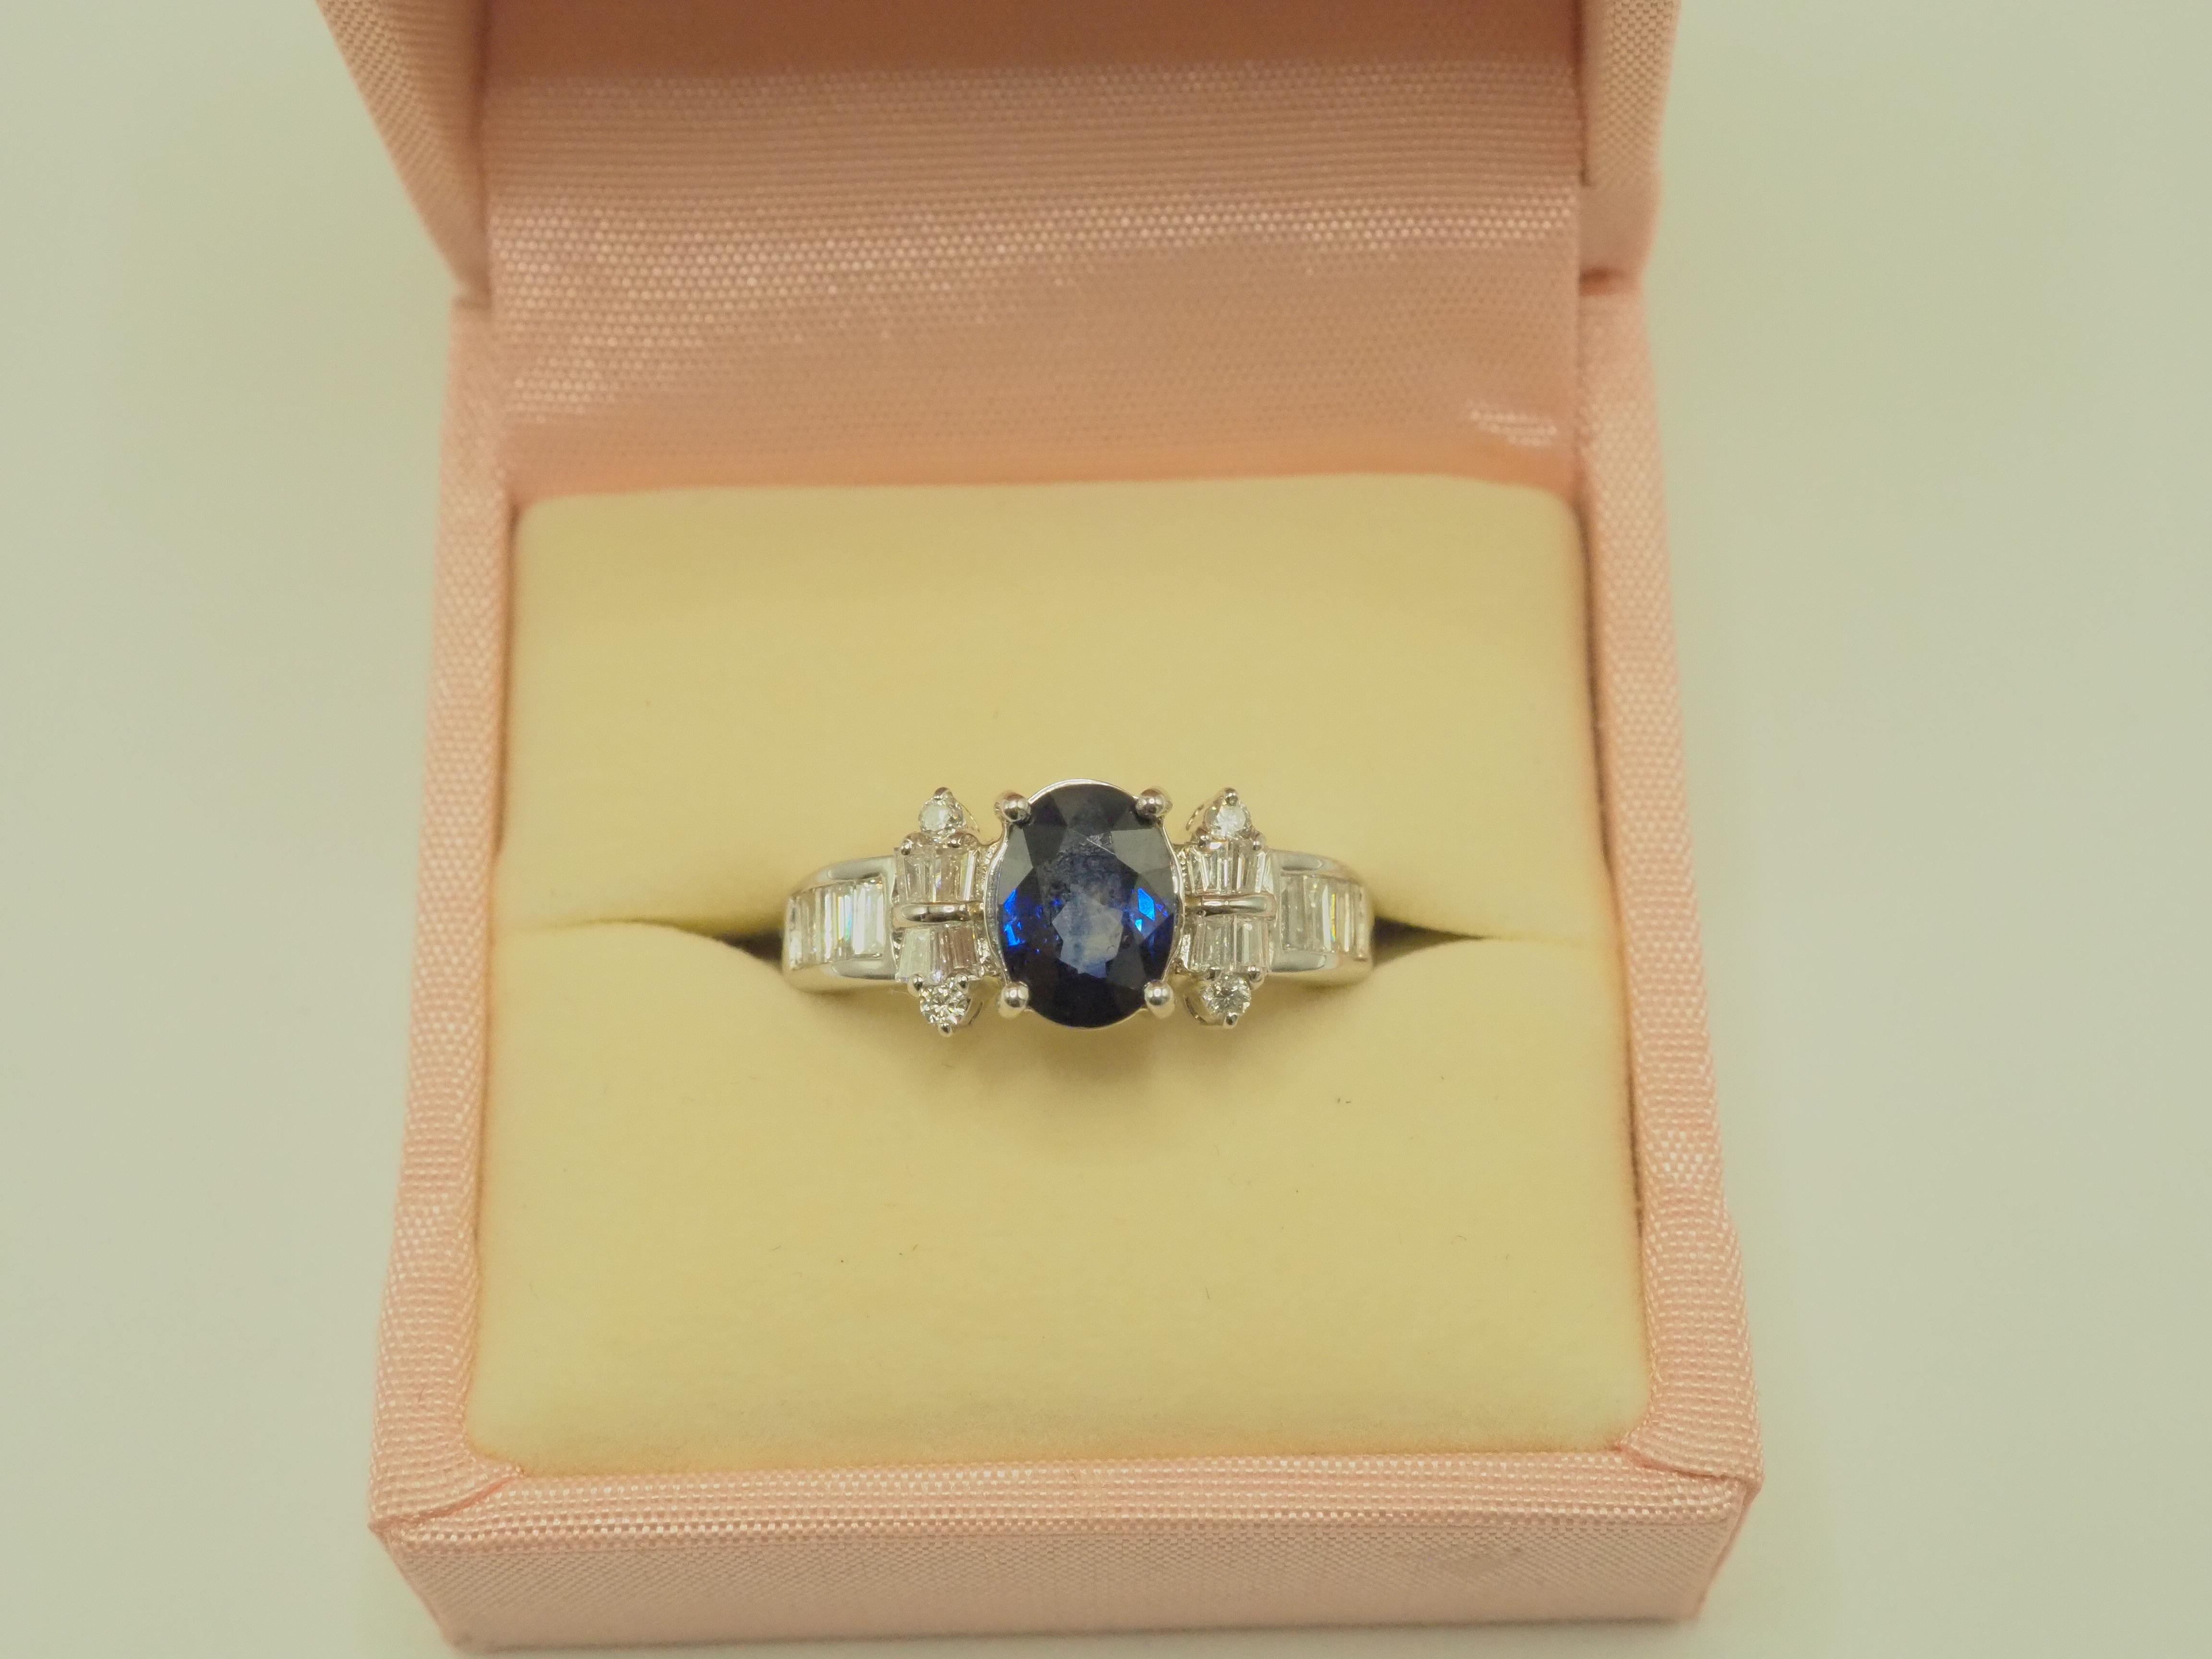 AIGS 18K White Gold 2.48ct Blue Sapphire & 0.63ct Diamond Engagement Ring For Sale 6